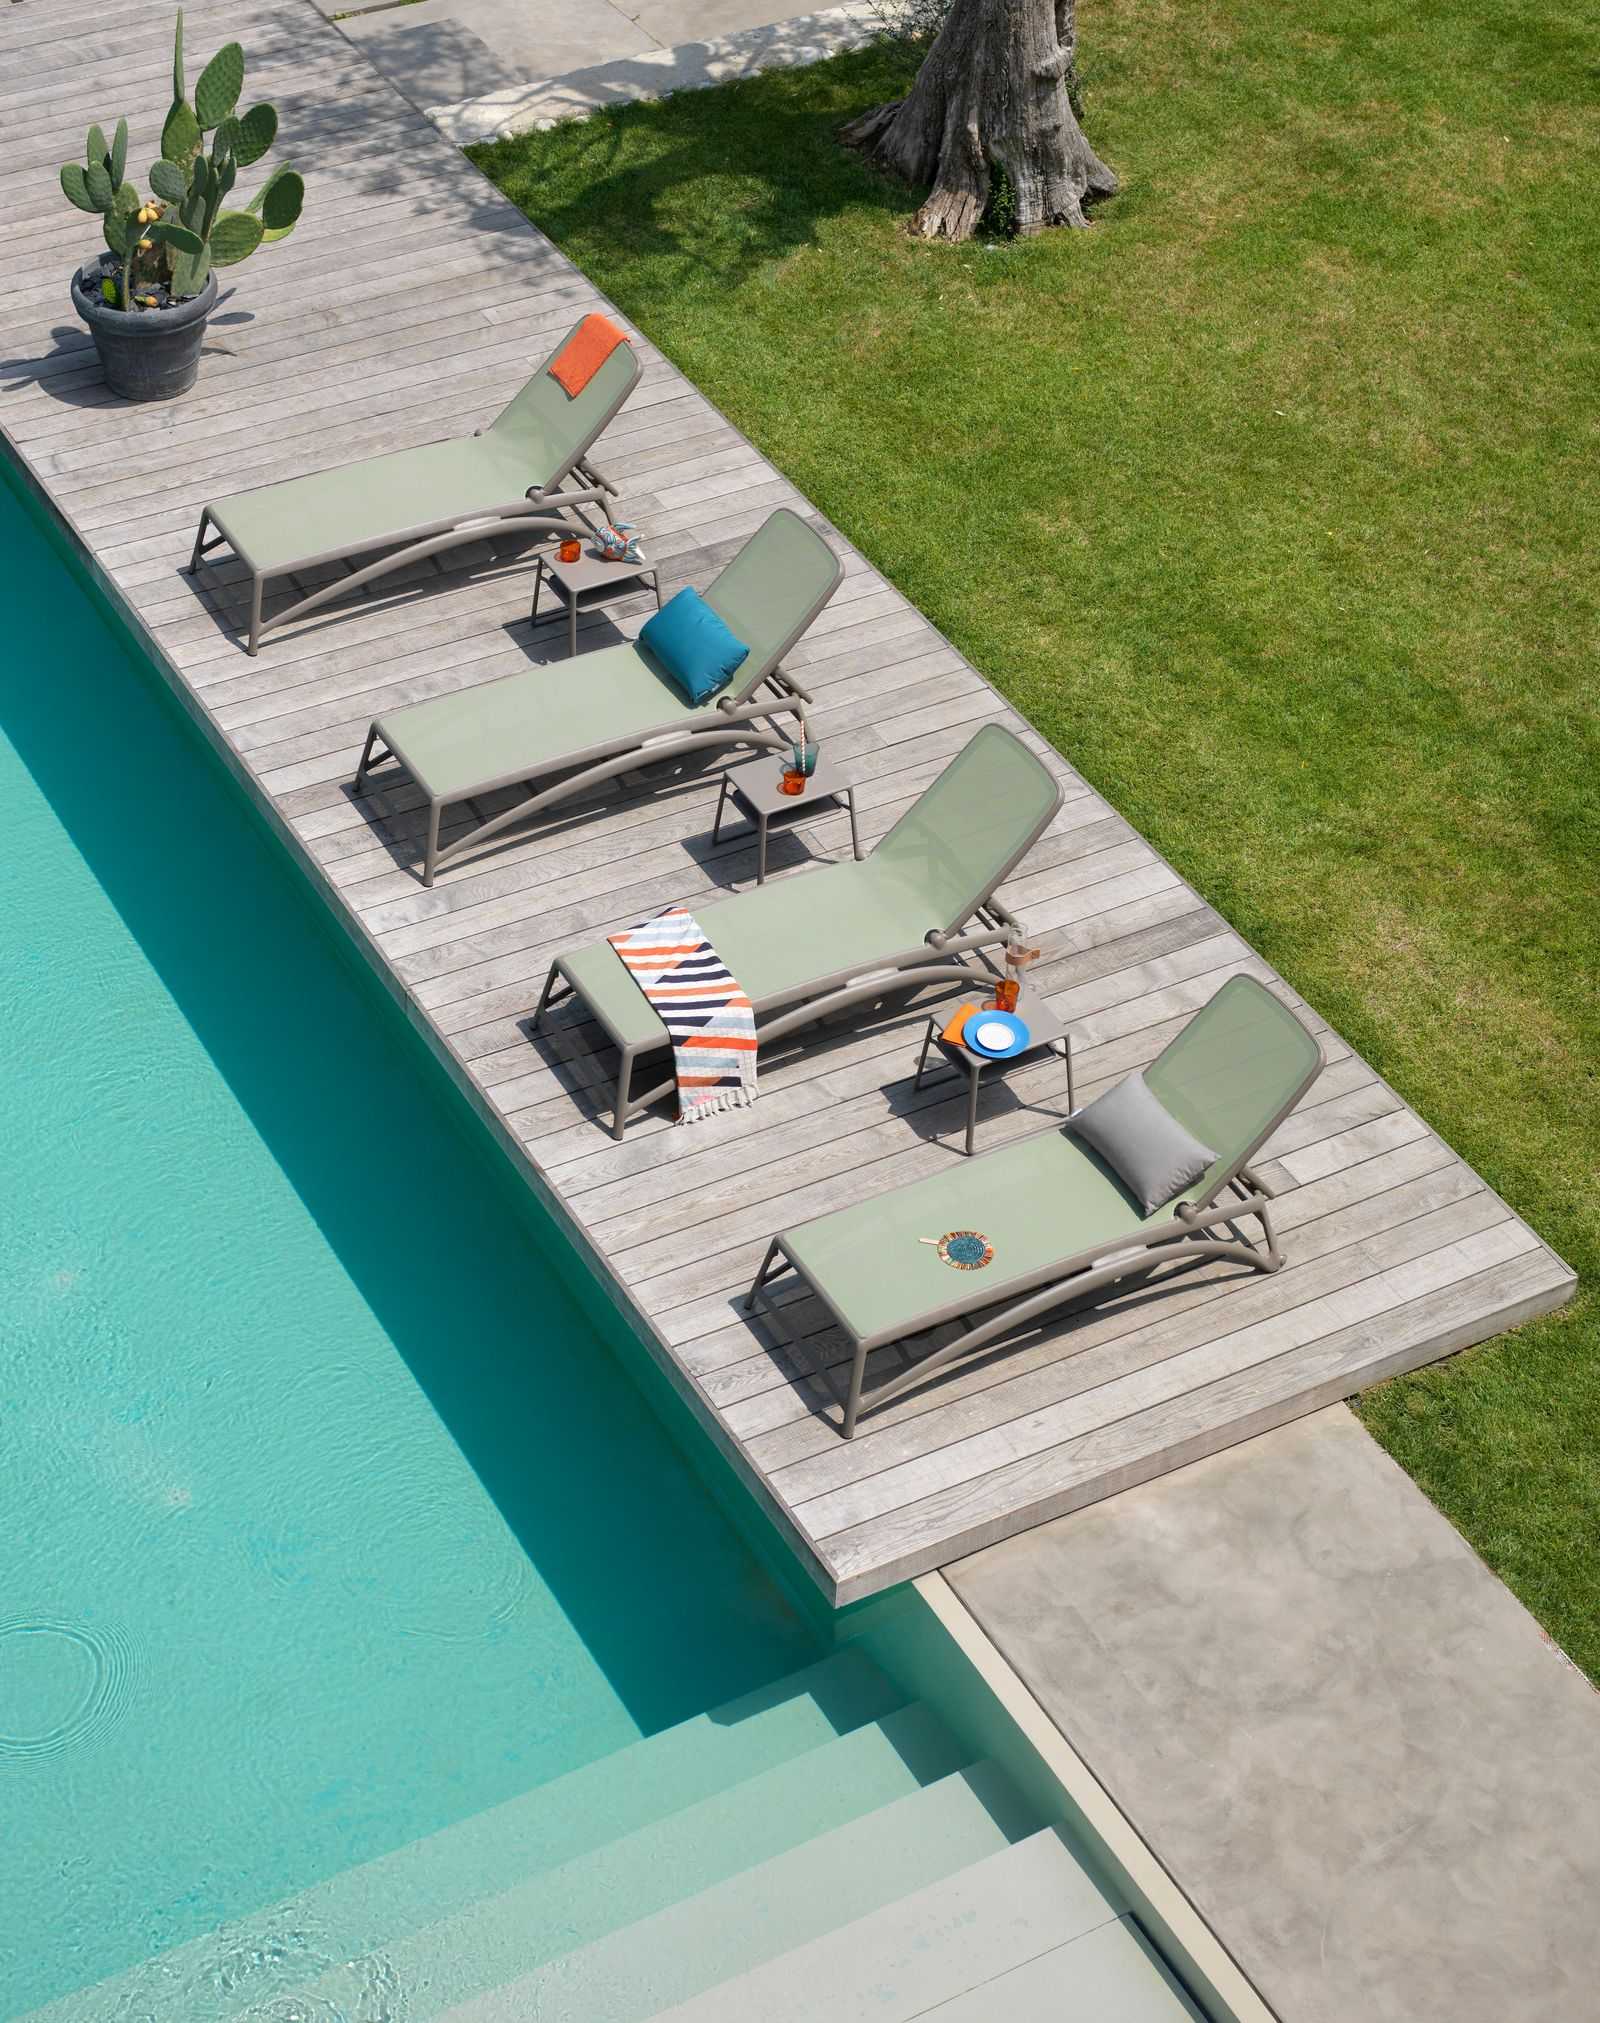 Remarkable Outdoor Living: Nadi Altantico Outdoor Resin Sunlounger. An outdoor pool area is furnished with sleek sun loungers arranged neatly on a wooden deck, complemented by a potted cactus and soft-colored towels, all inviting relaxation under the open sky.